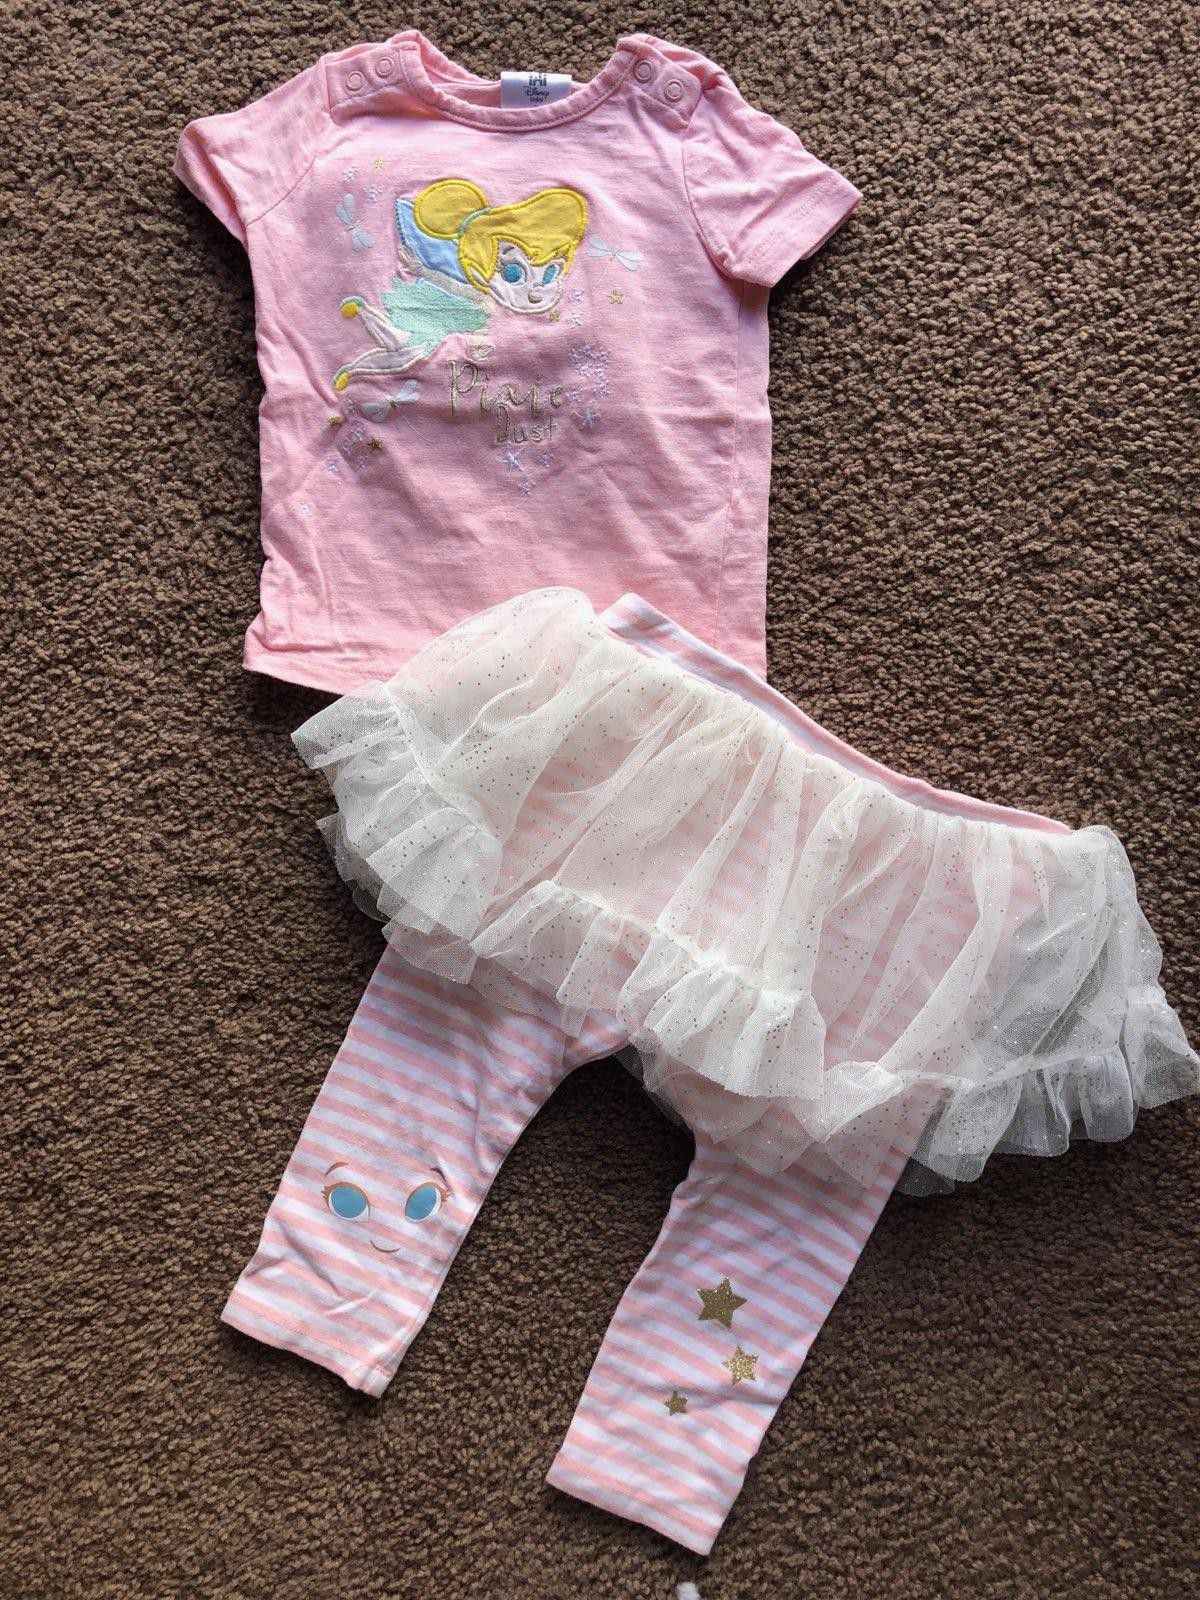 Tinkerbell toddler girl outfit, size 12-18 months